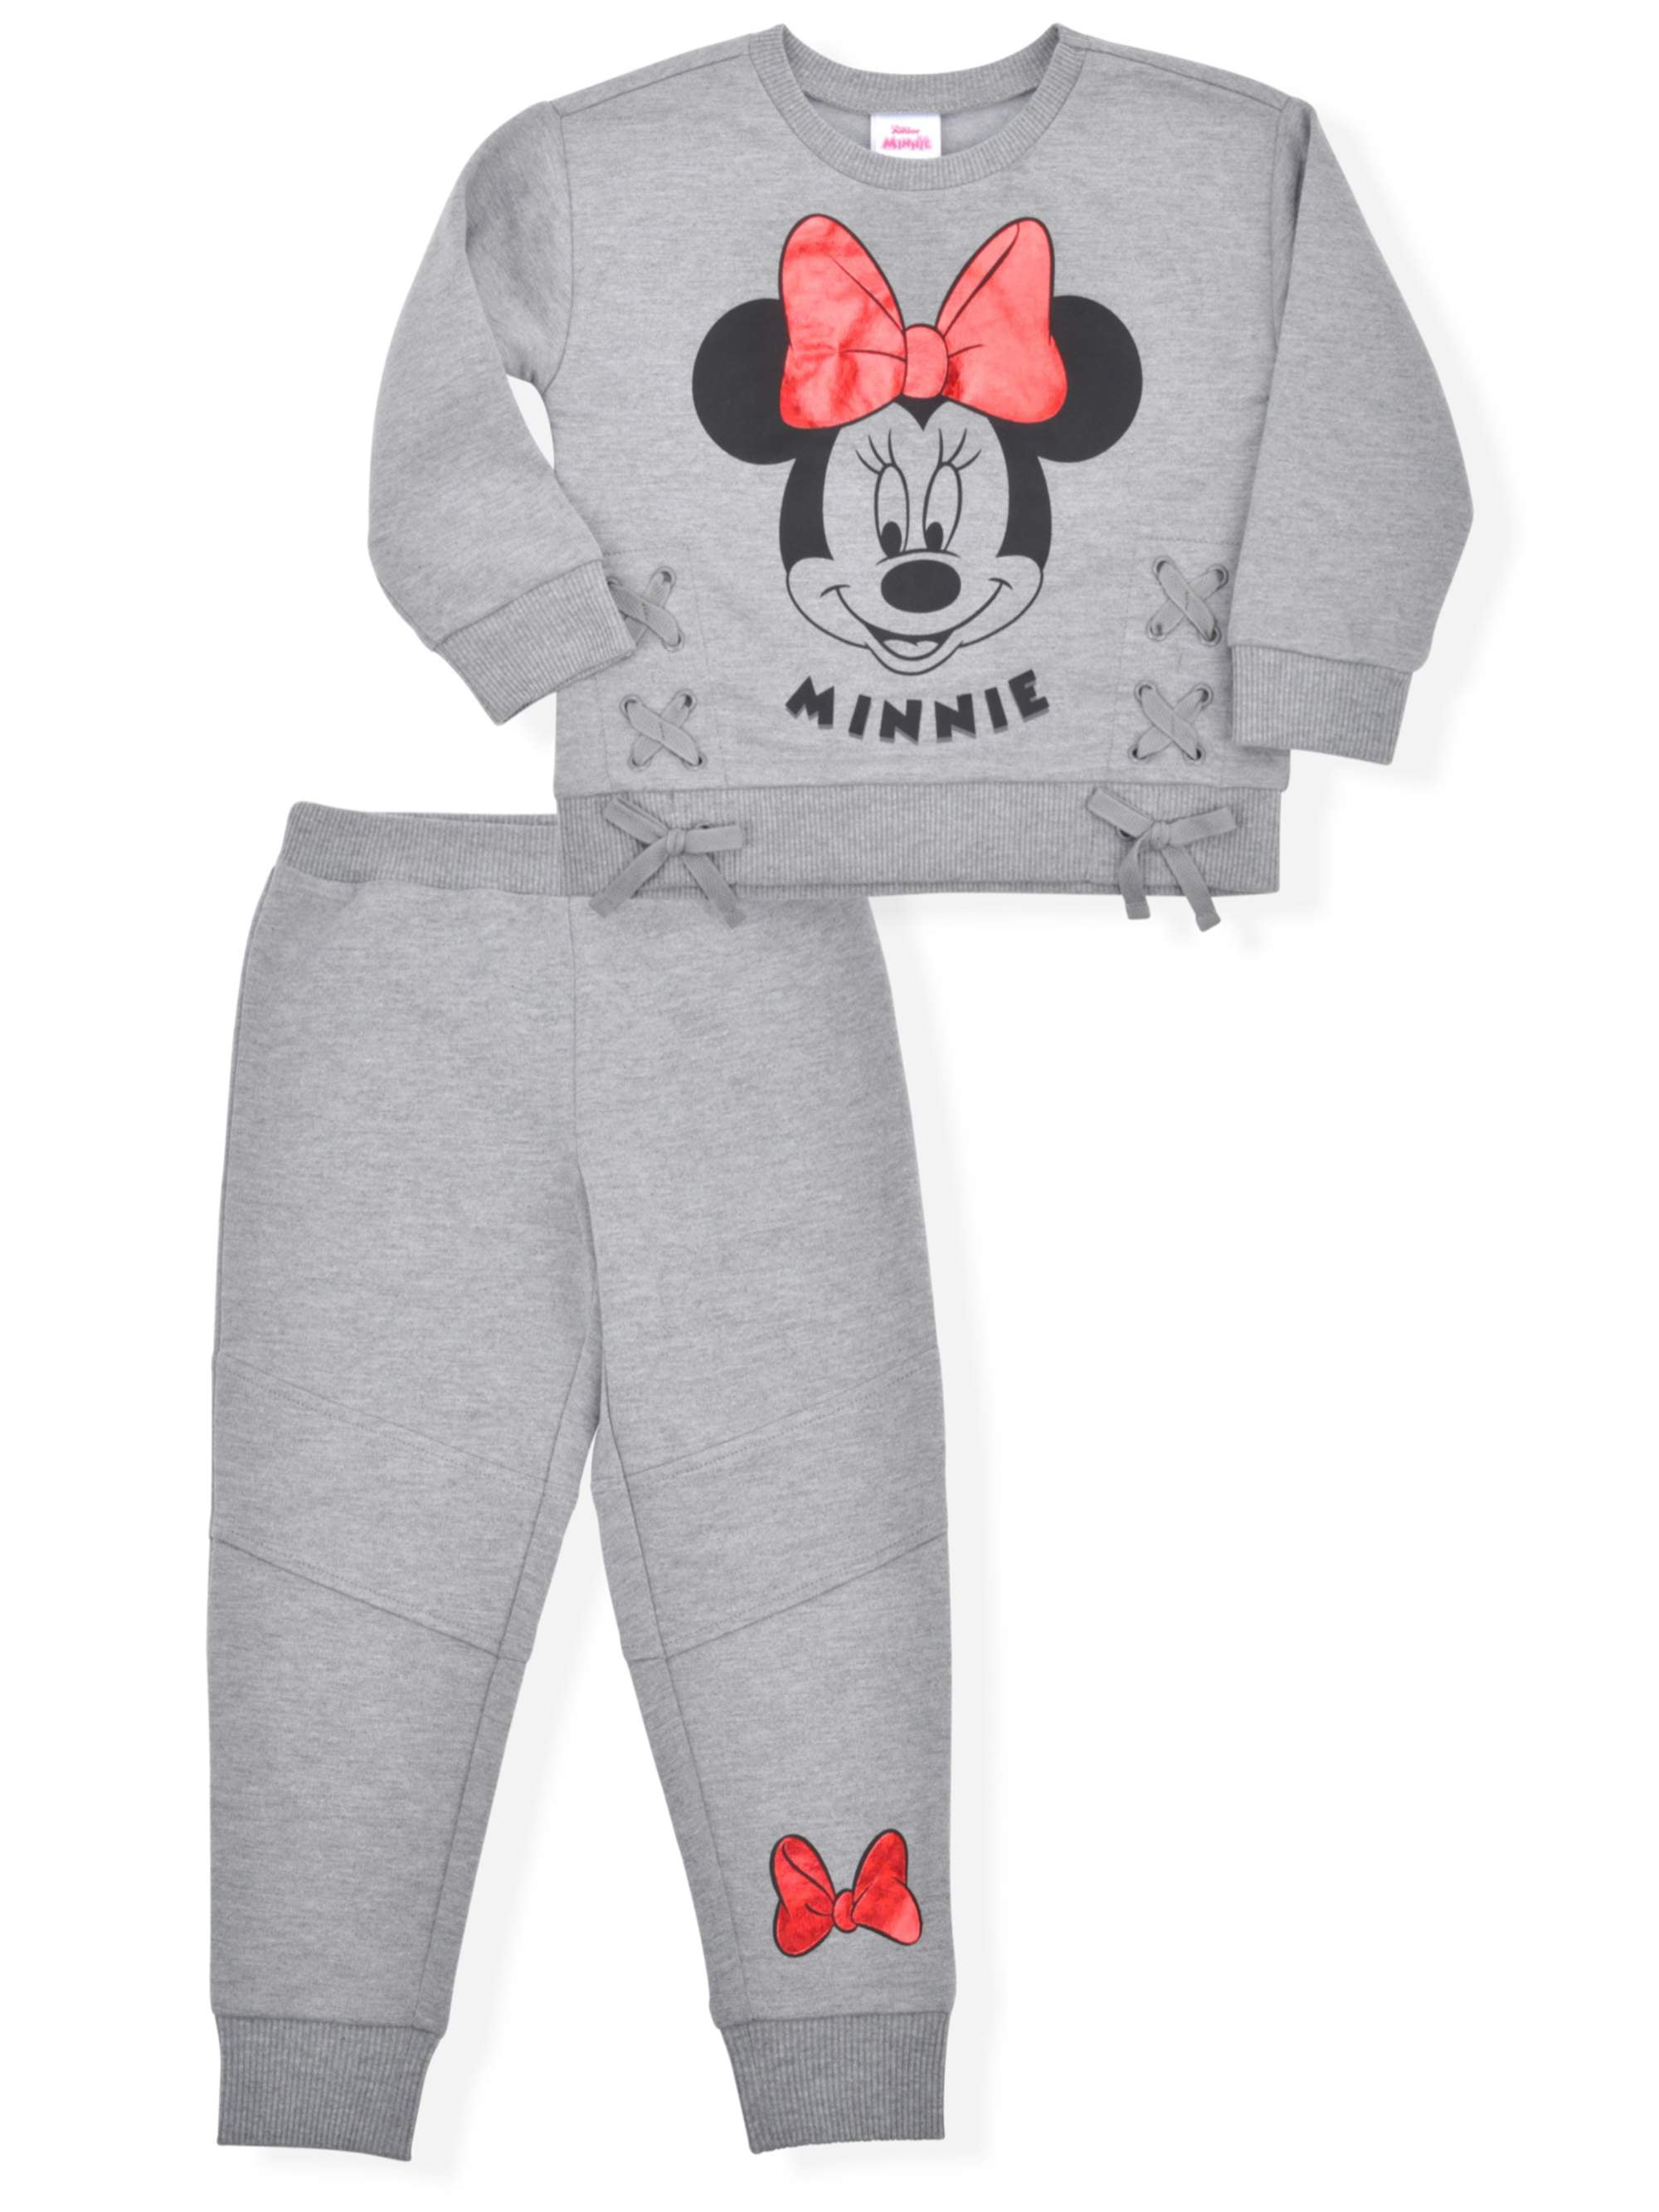 Kids Baby Girls Minnie Mouse Sweatshirt Tops Pants Tracksuit Outfits Sets Winter 